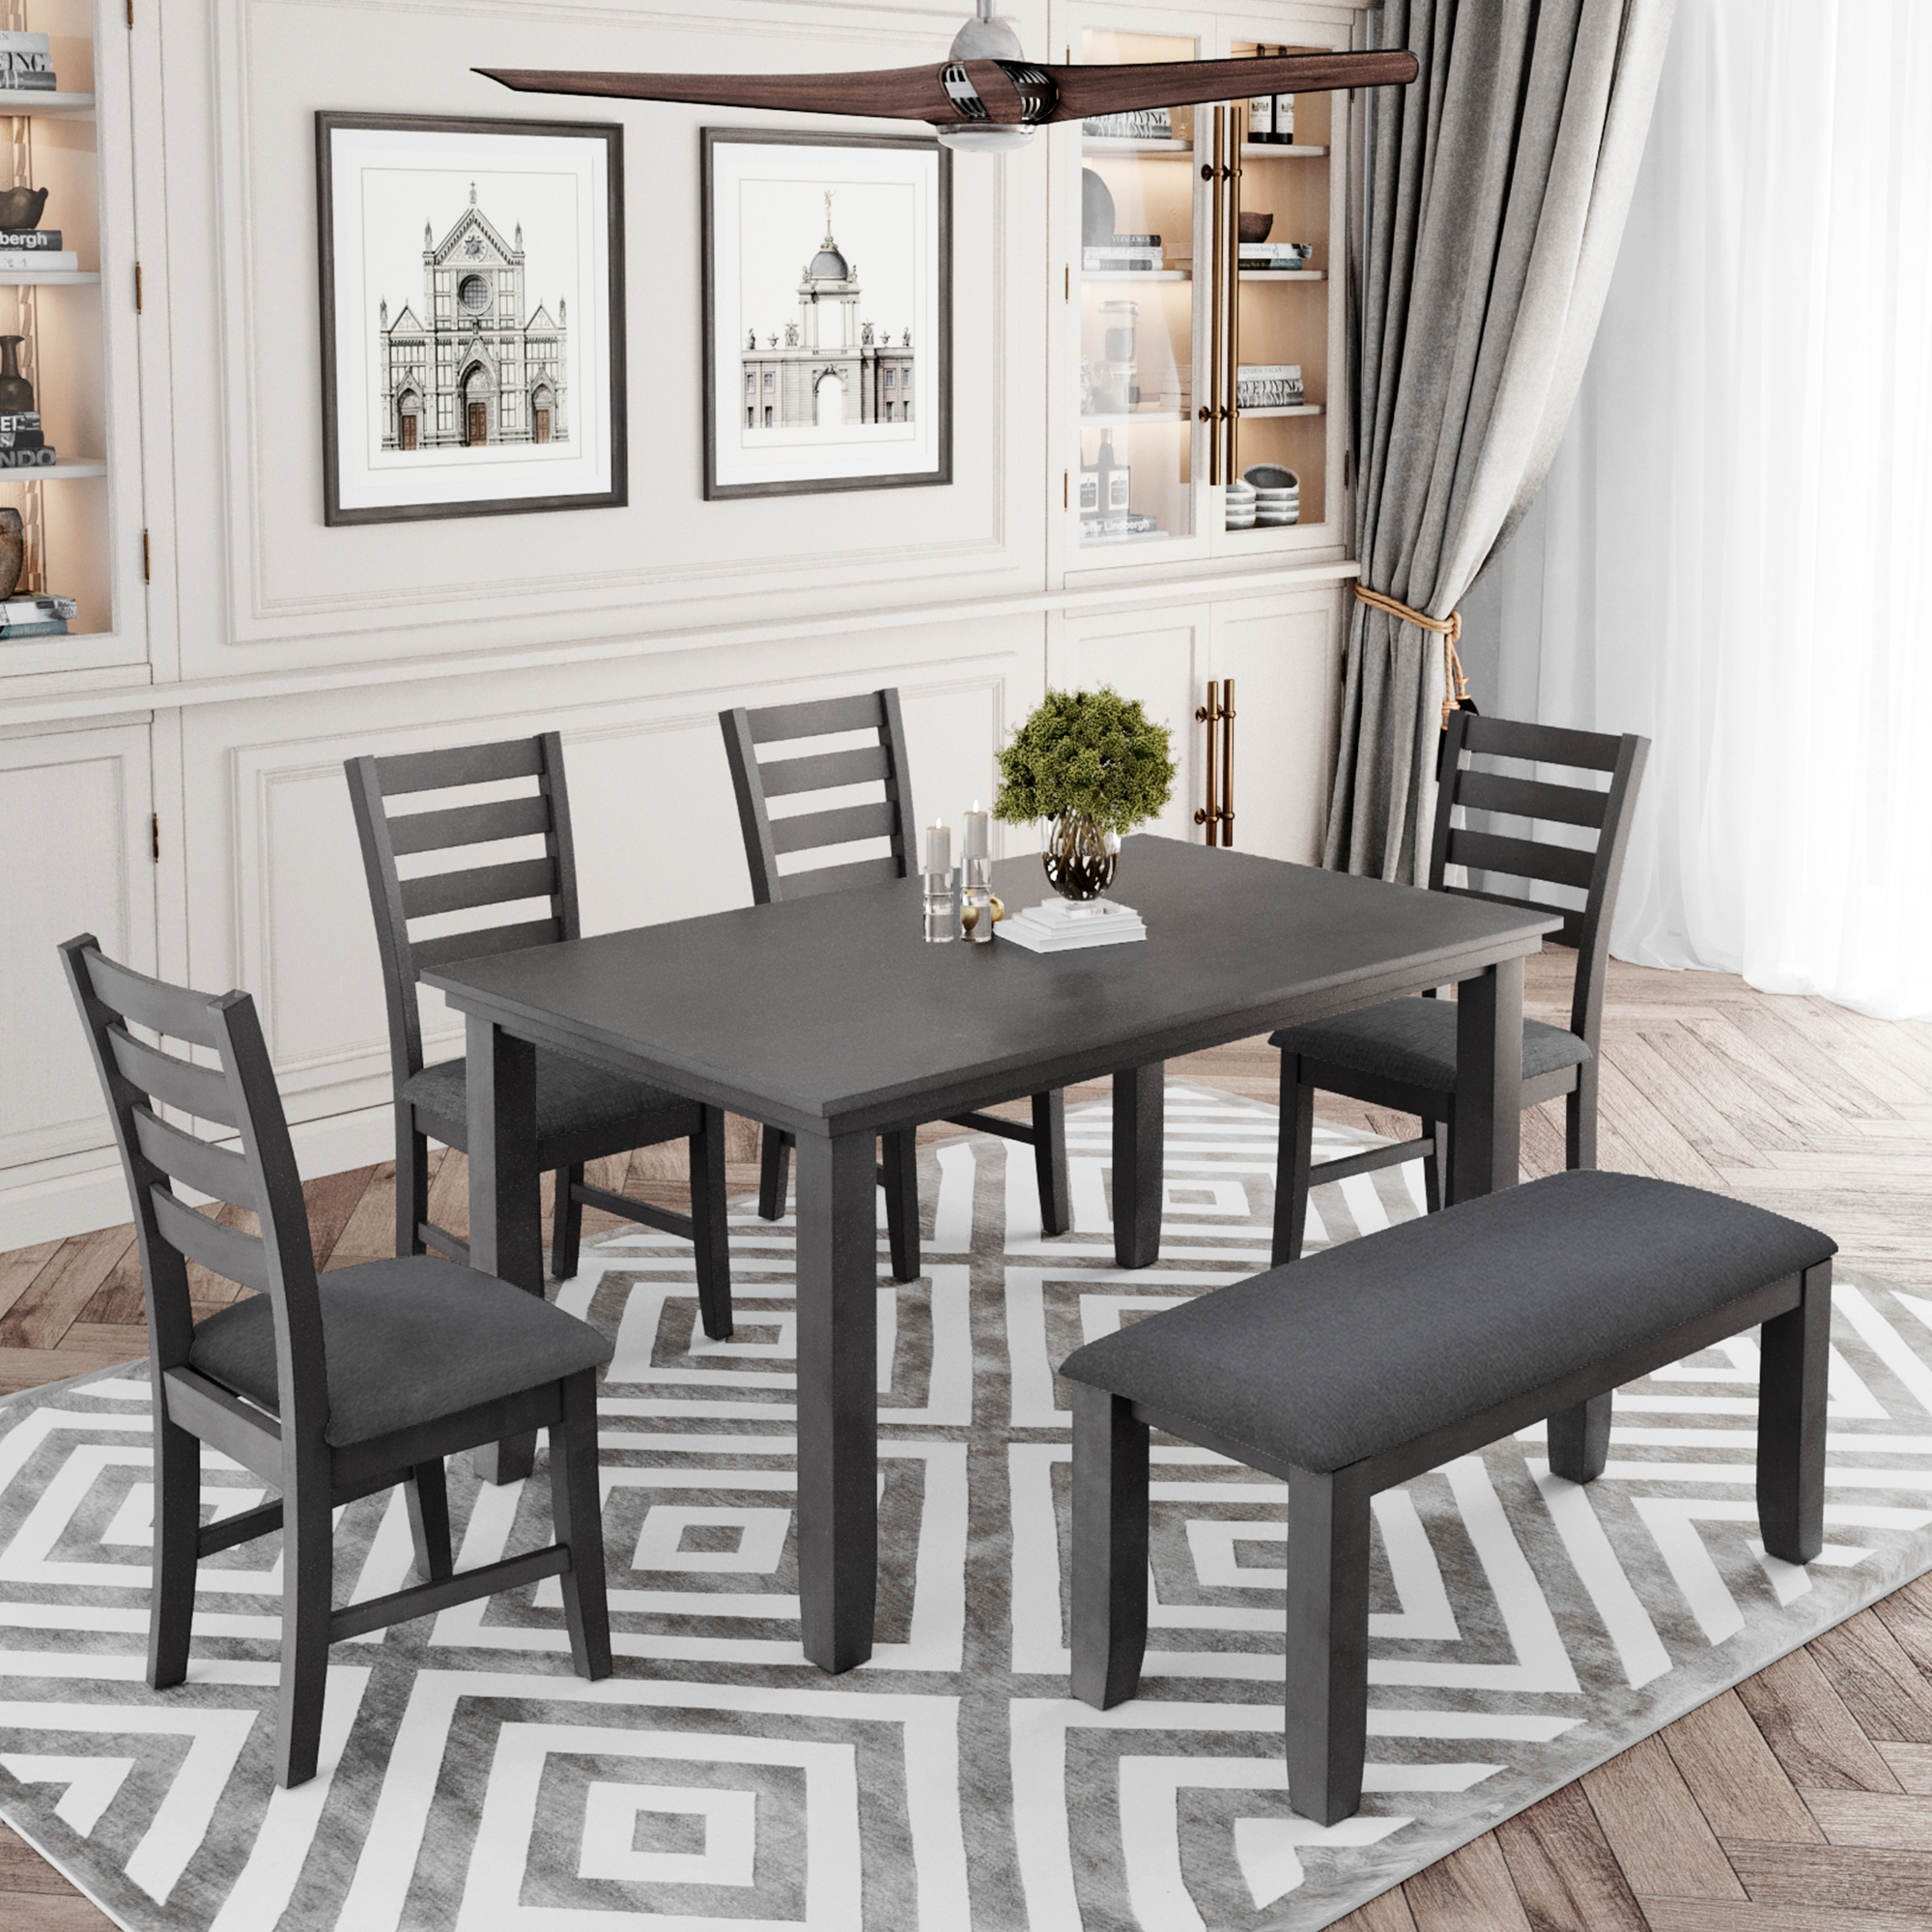 TREXM Dining Room Table and Chairs with Bench, Rustic Wood Dining Set, Set of 6 (Gray)-CASAINC